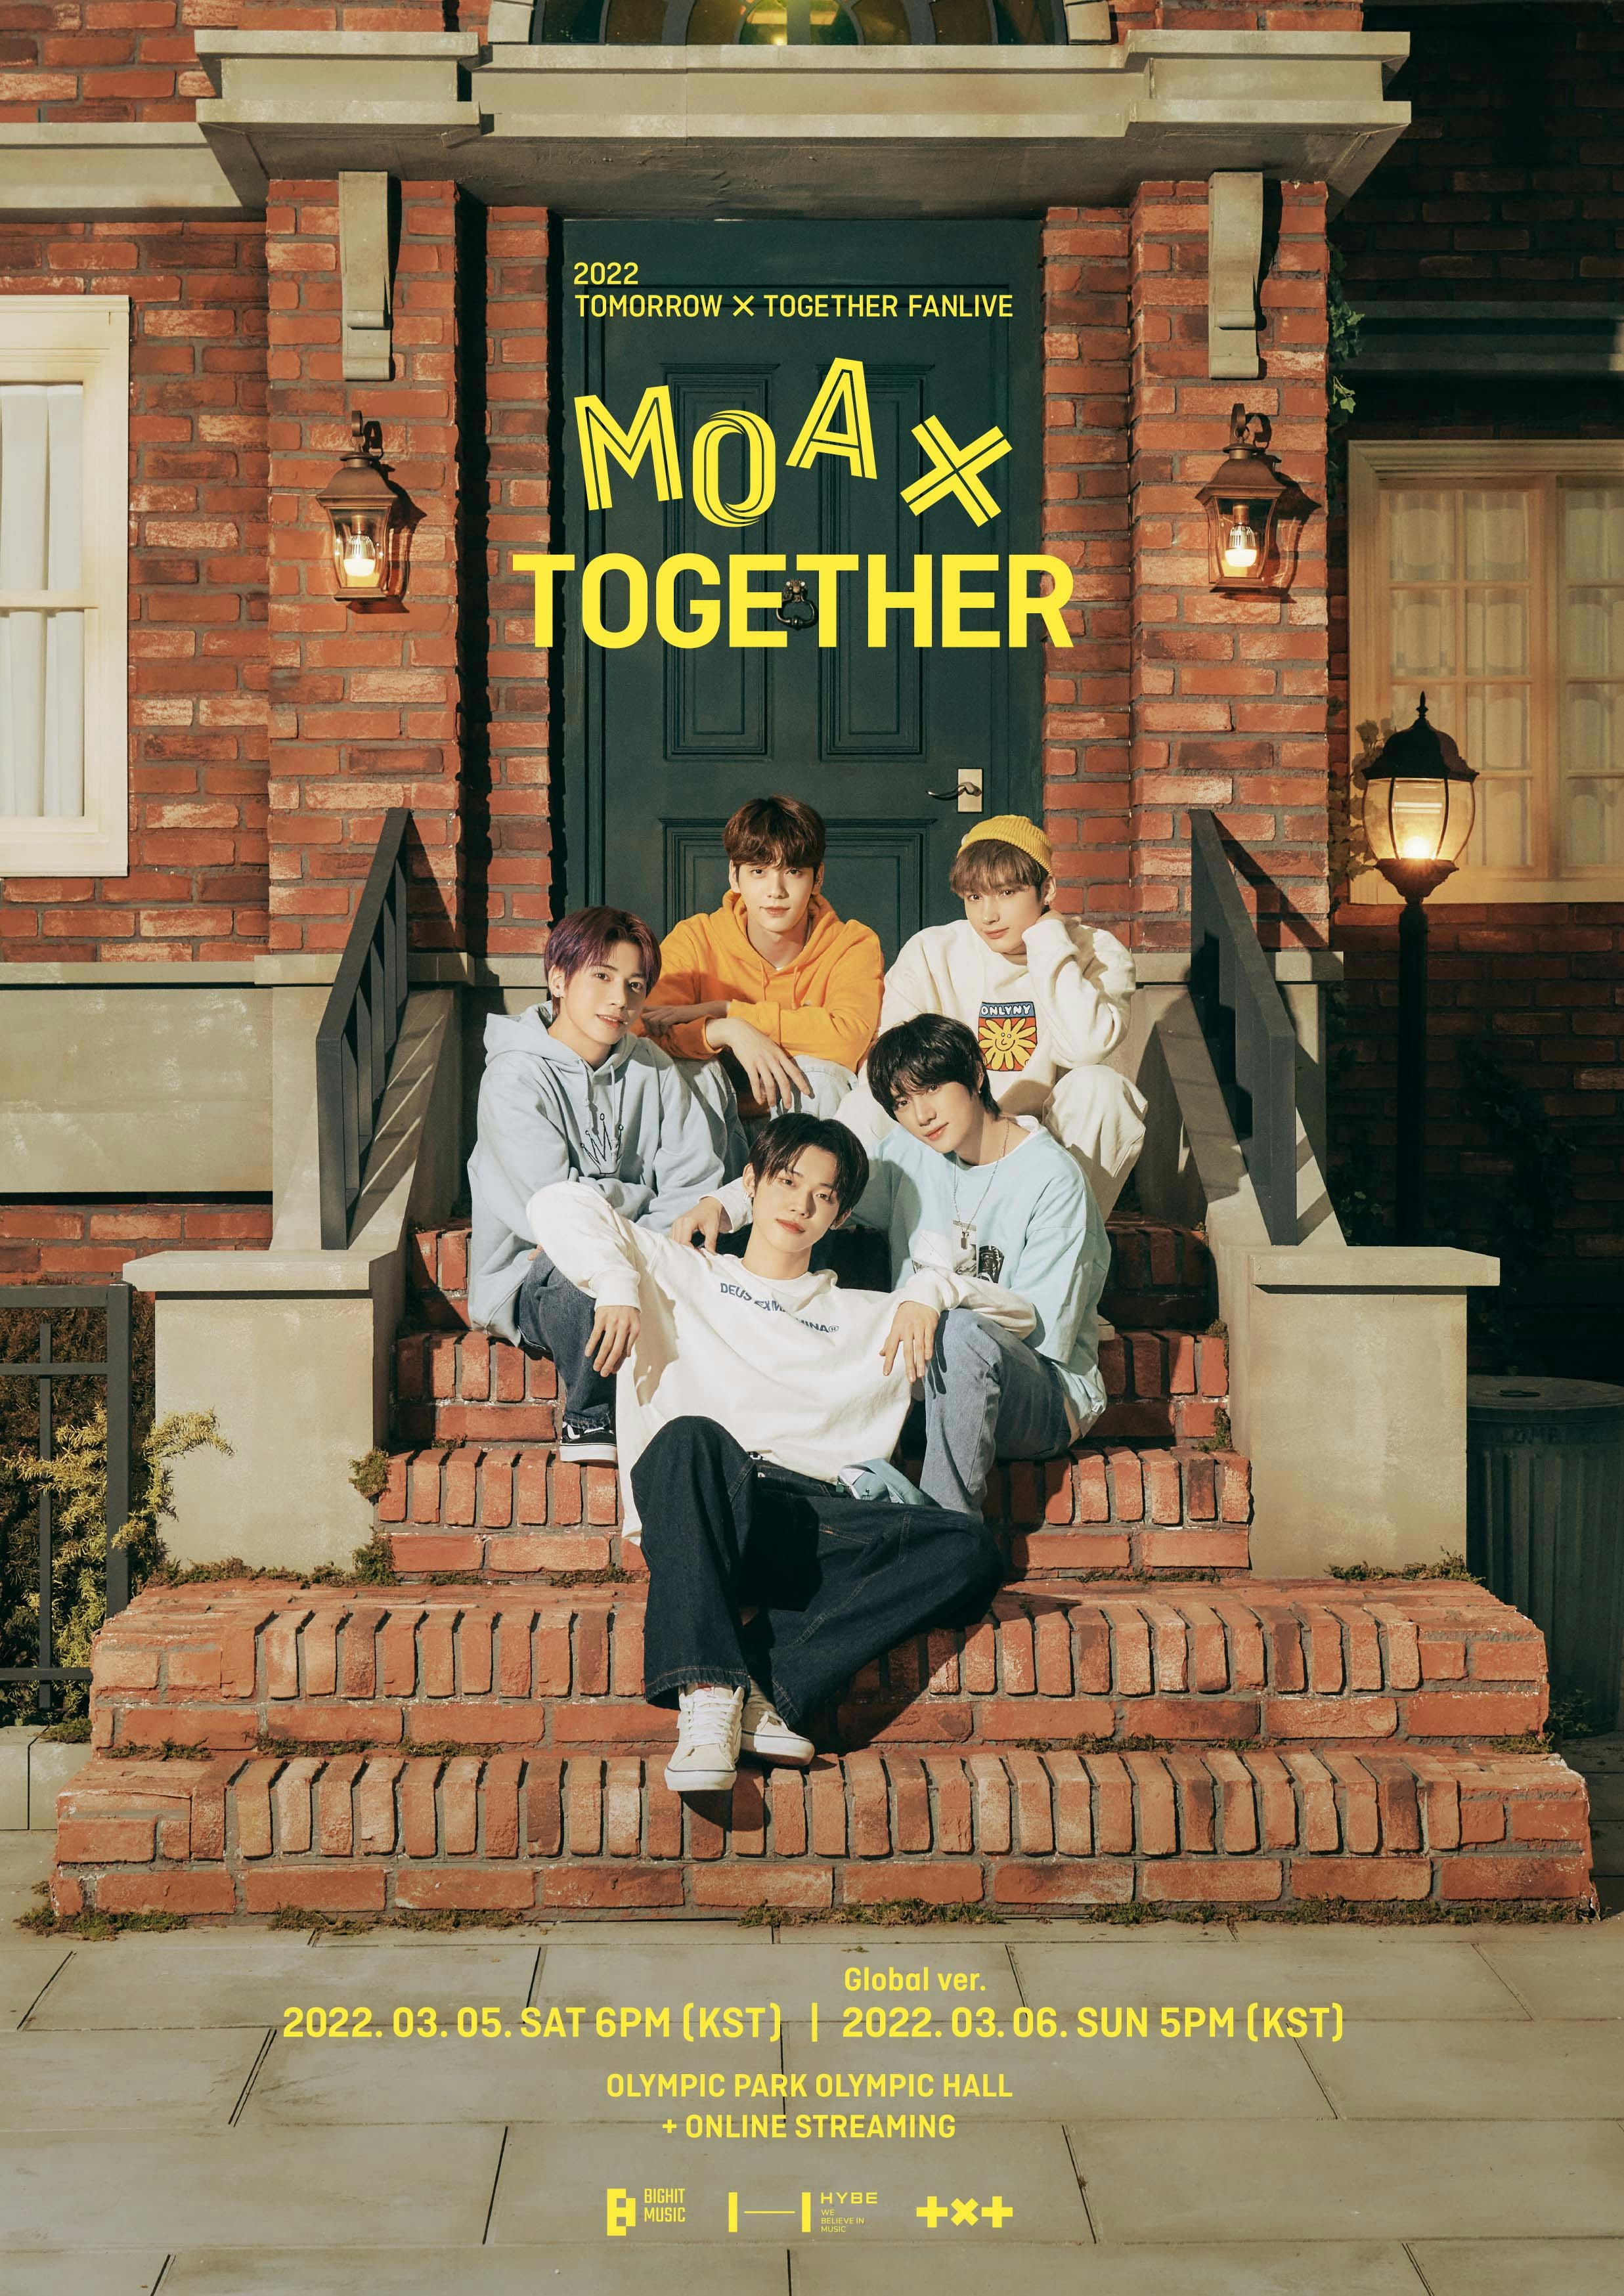 TXT'S 2022 Fan Live Event For MOA: Date, Teasers, How to Stream